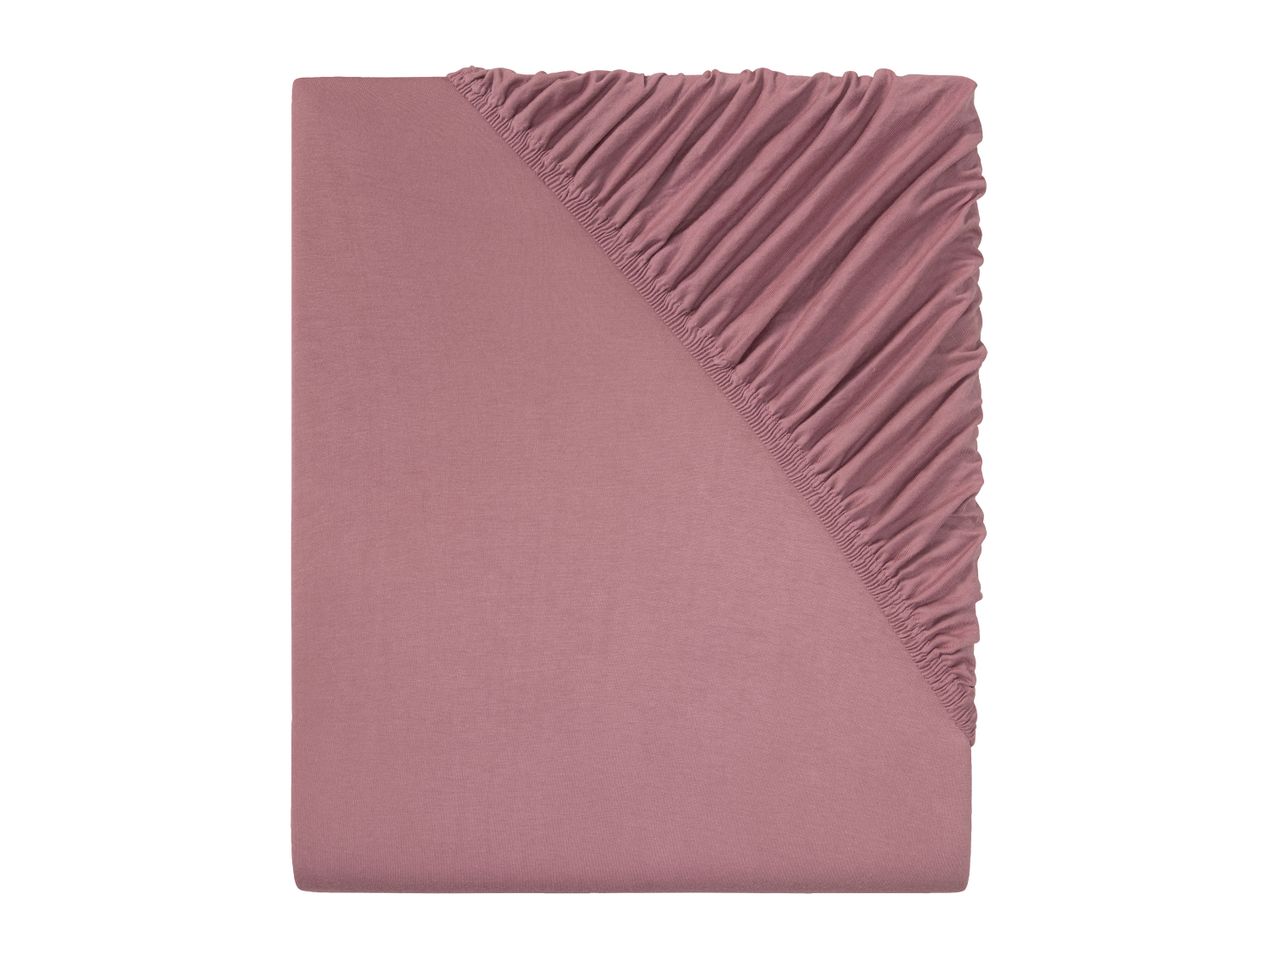 Go to full screen view: Livarno Home Jersey Fitted Sheet - King - Image 3